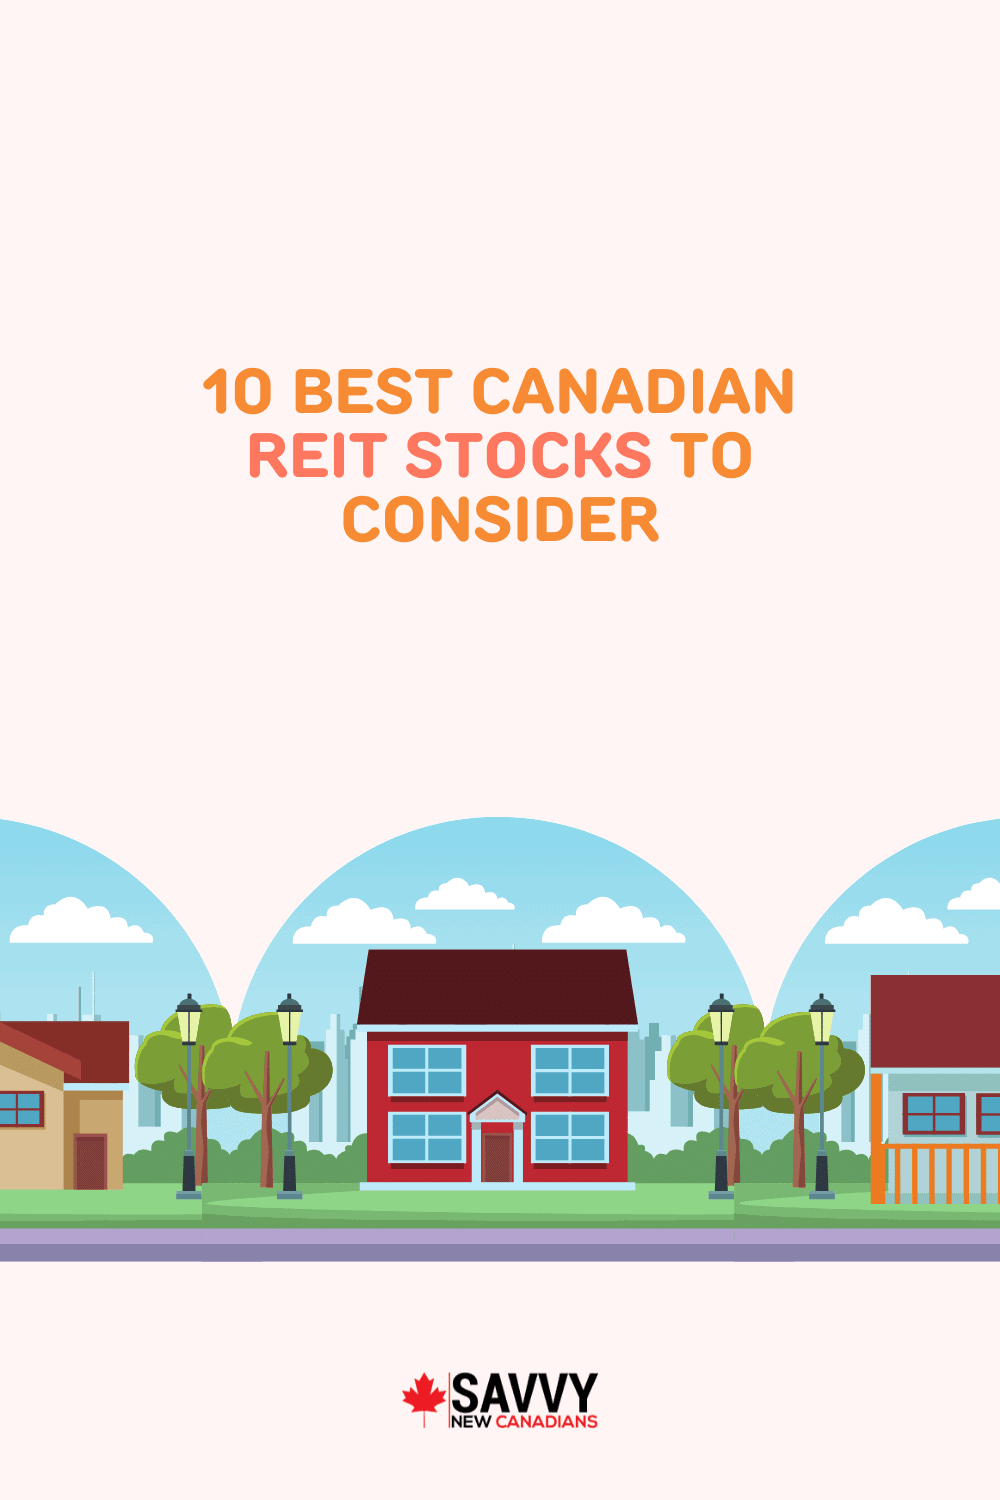 10 Best Canadian REIT Stocks To Consider in 2022